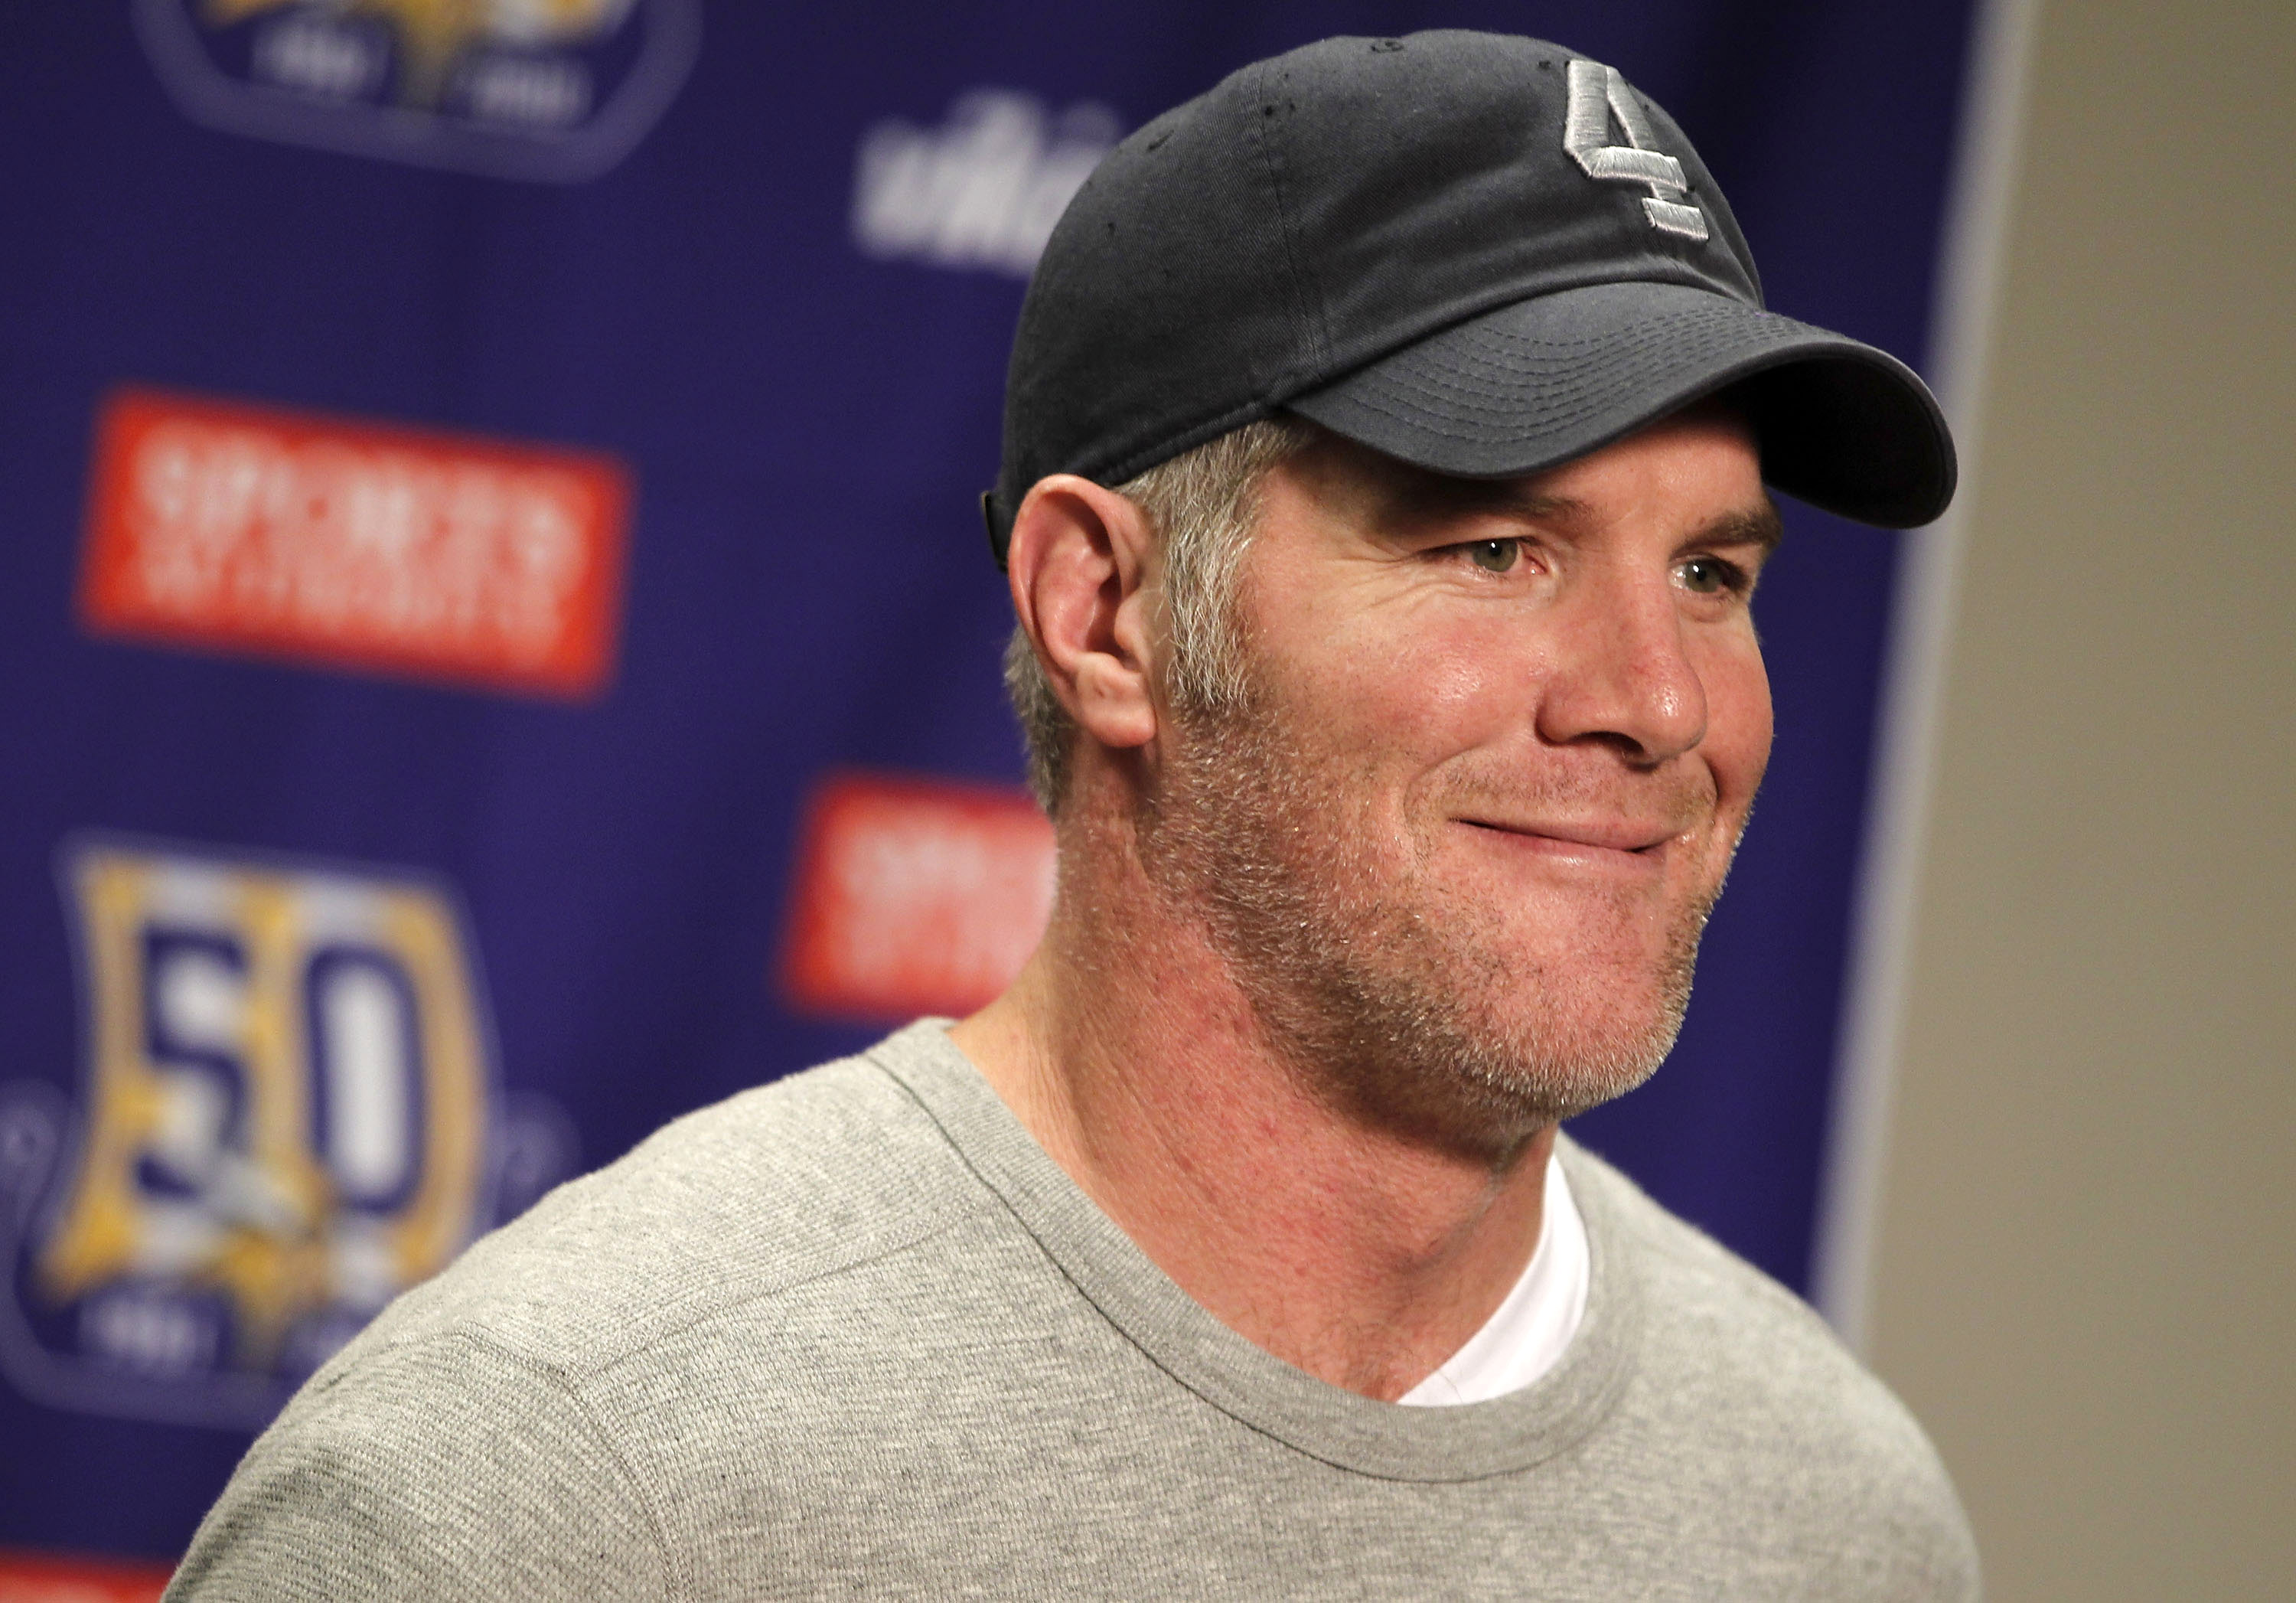 Brett Favre at a news conference after his final game